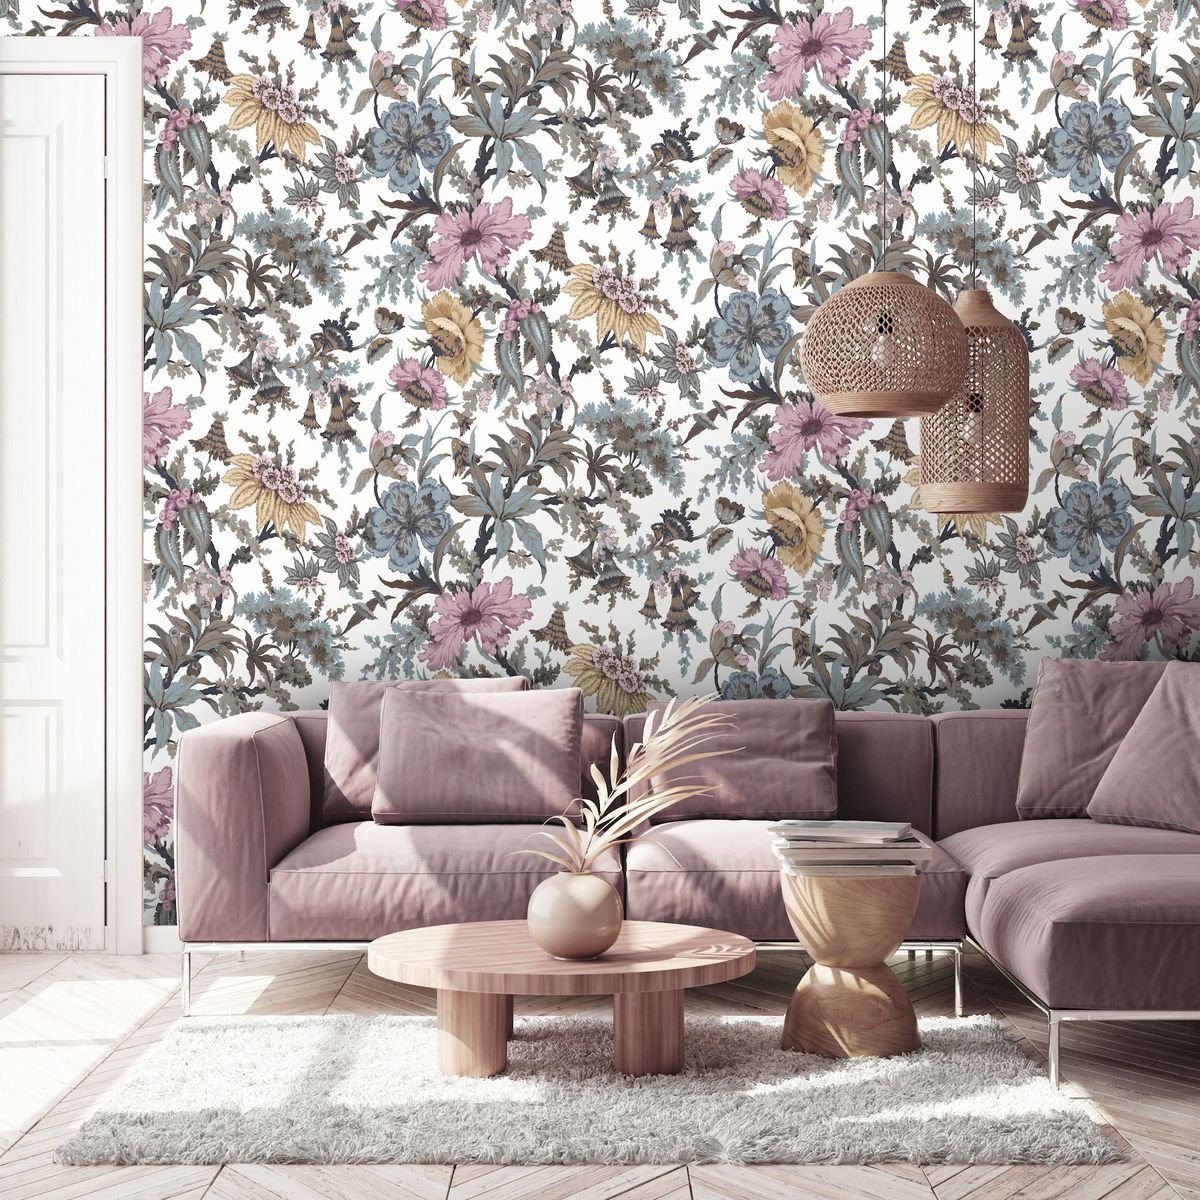 <p>You can't go wrong with a floral living room wallpaper. Pick a bold and whimsical pattern to make a statement.</p><p>'Wallpaper can help make small spaces feel more intimate and add interest to larger rooms by creating another layer of pattern, and there is no rule regarding the scale of design – using a large design in a small environment can make a striking visual statement,' says Patrick O’Donnell, Brand Ambassador at <a href="https://www.farrow-ball.com/">Farrow & Ball</a>.</p><p><em>Pictured: Onism Ecru, <a href="https://www.woodchipandmagnolia.co.uk/products/onism-ecru-floral-wallpaper">Woodchip & Magnolia</a></em></p>